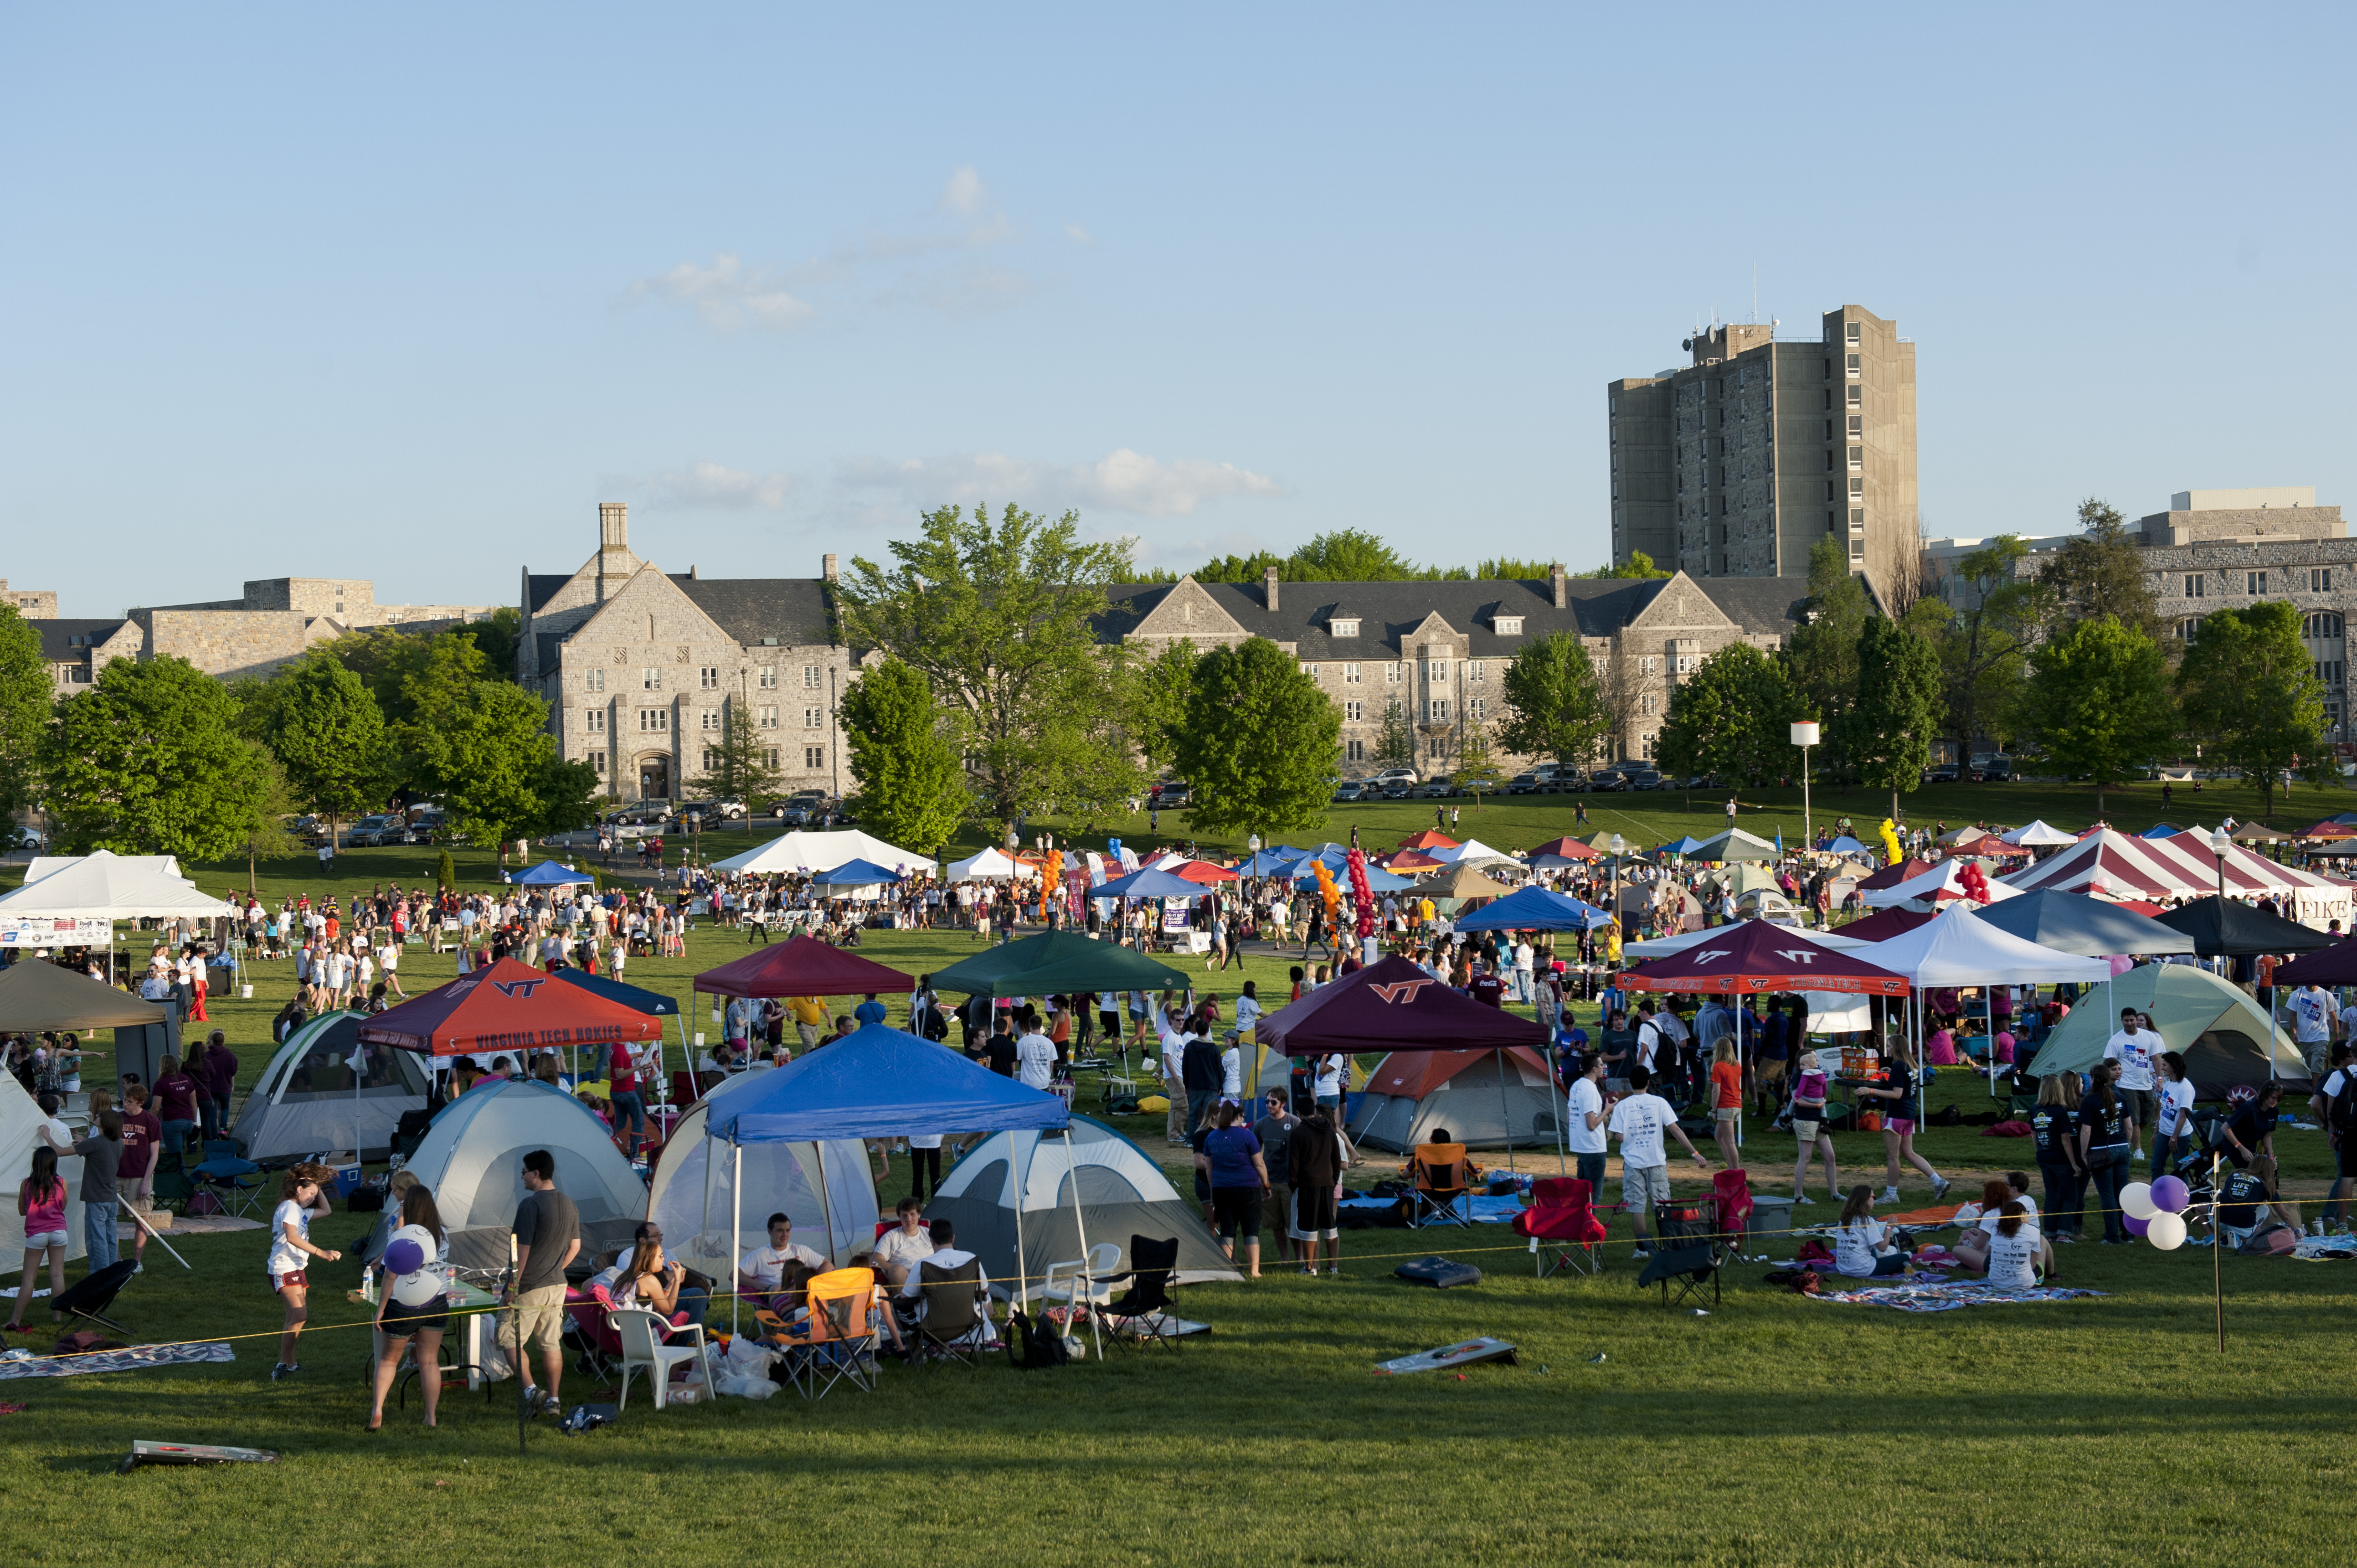 Tents and people on the Drillfield